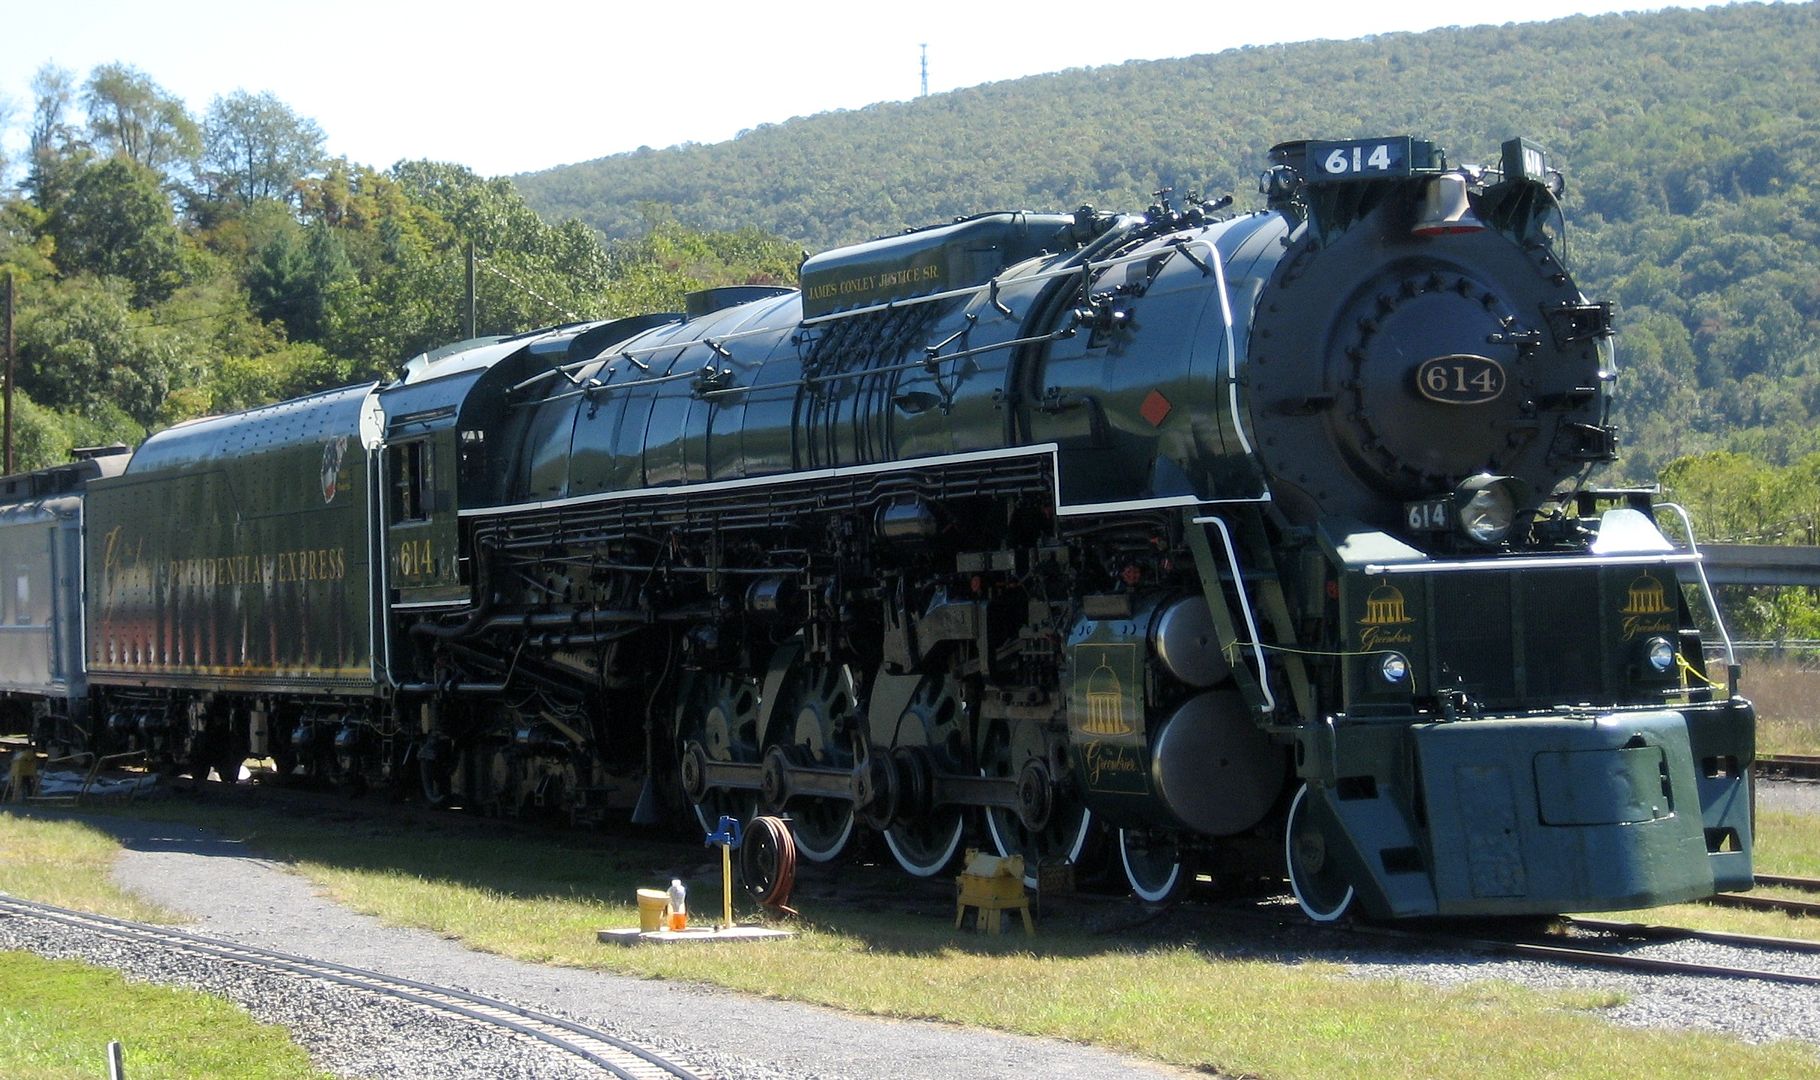 I highly recommend a visit to Douthat State Park. About 15 minutes from the park (in Clifton Forge), you can visit the C&O Railway Museum, and see this beautiful steam locomotive up close and personal!